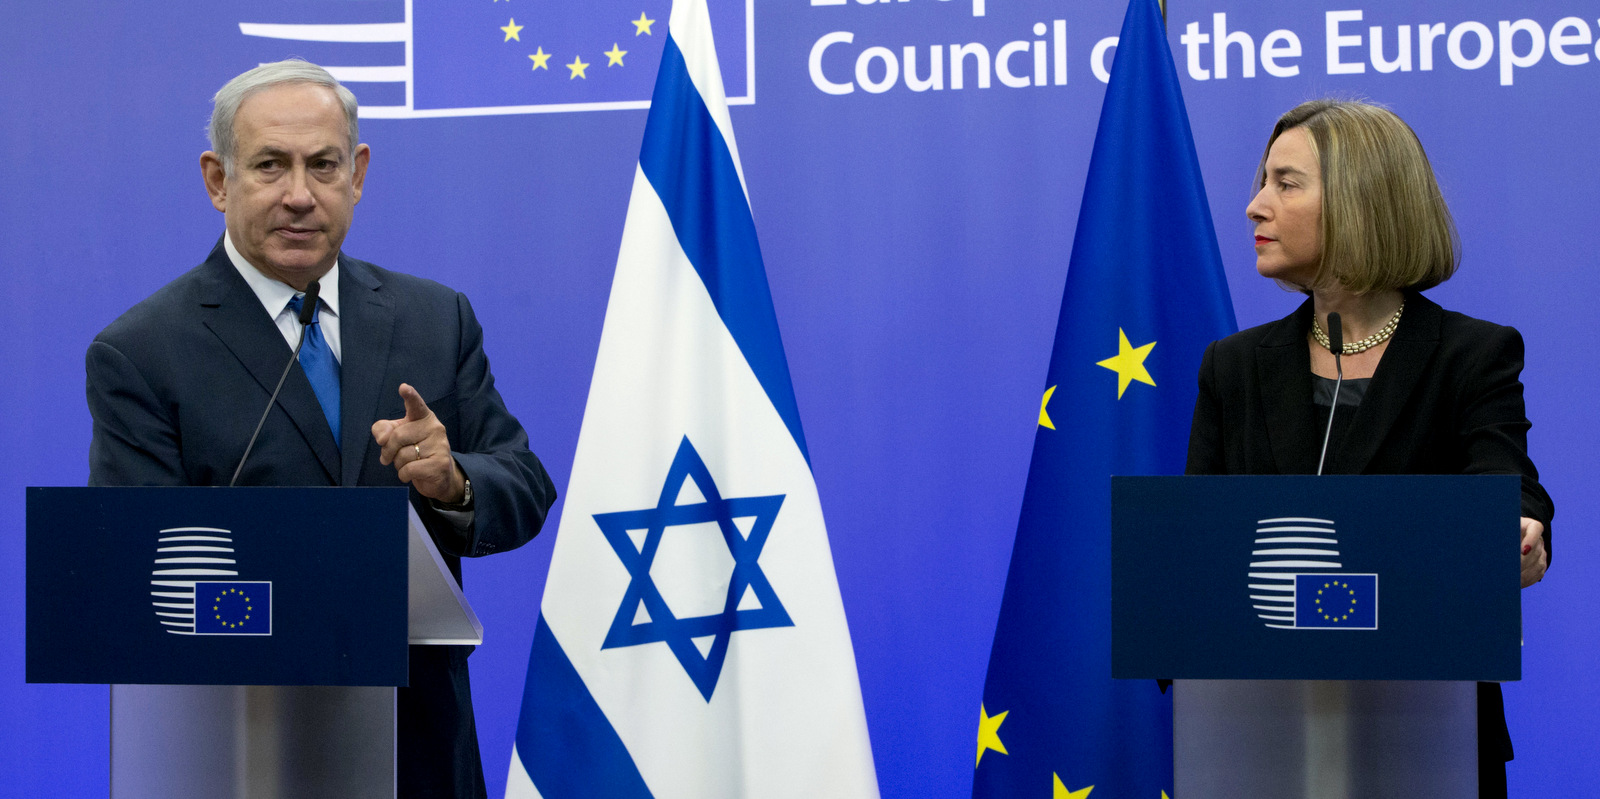 Israeli Prime Minister Benjamin Netanyahu, left, addresses a media conference with European Union High Representative Federica Mogherini at the EU Council building in Brussels on Dec. 11, 2017. (AP/Virginia Mayo)